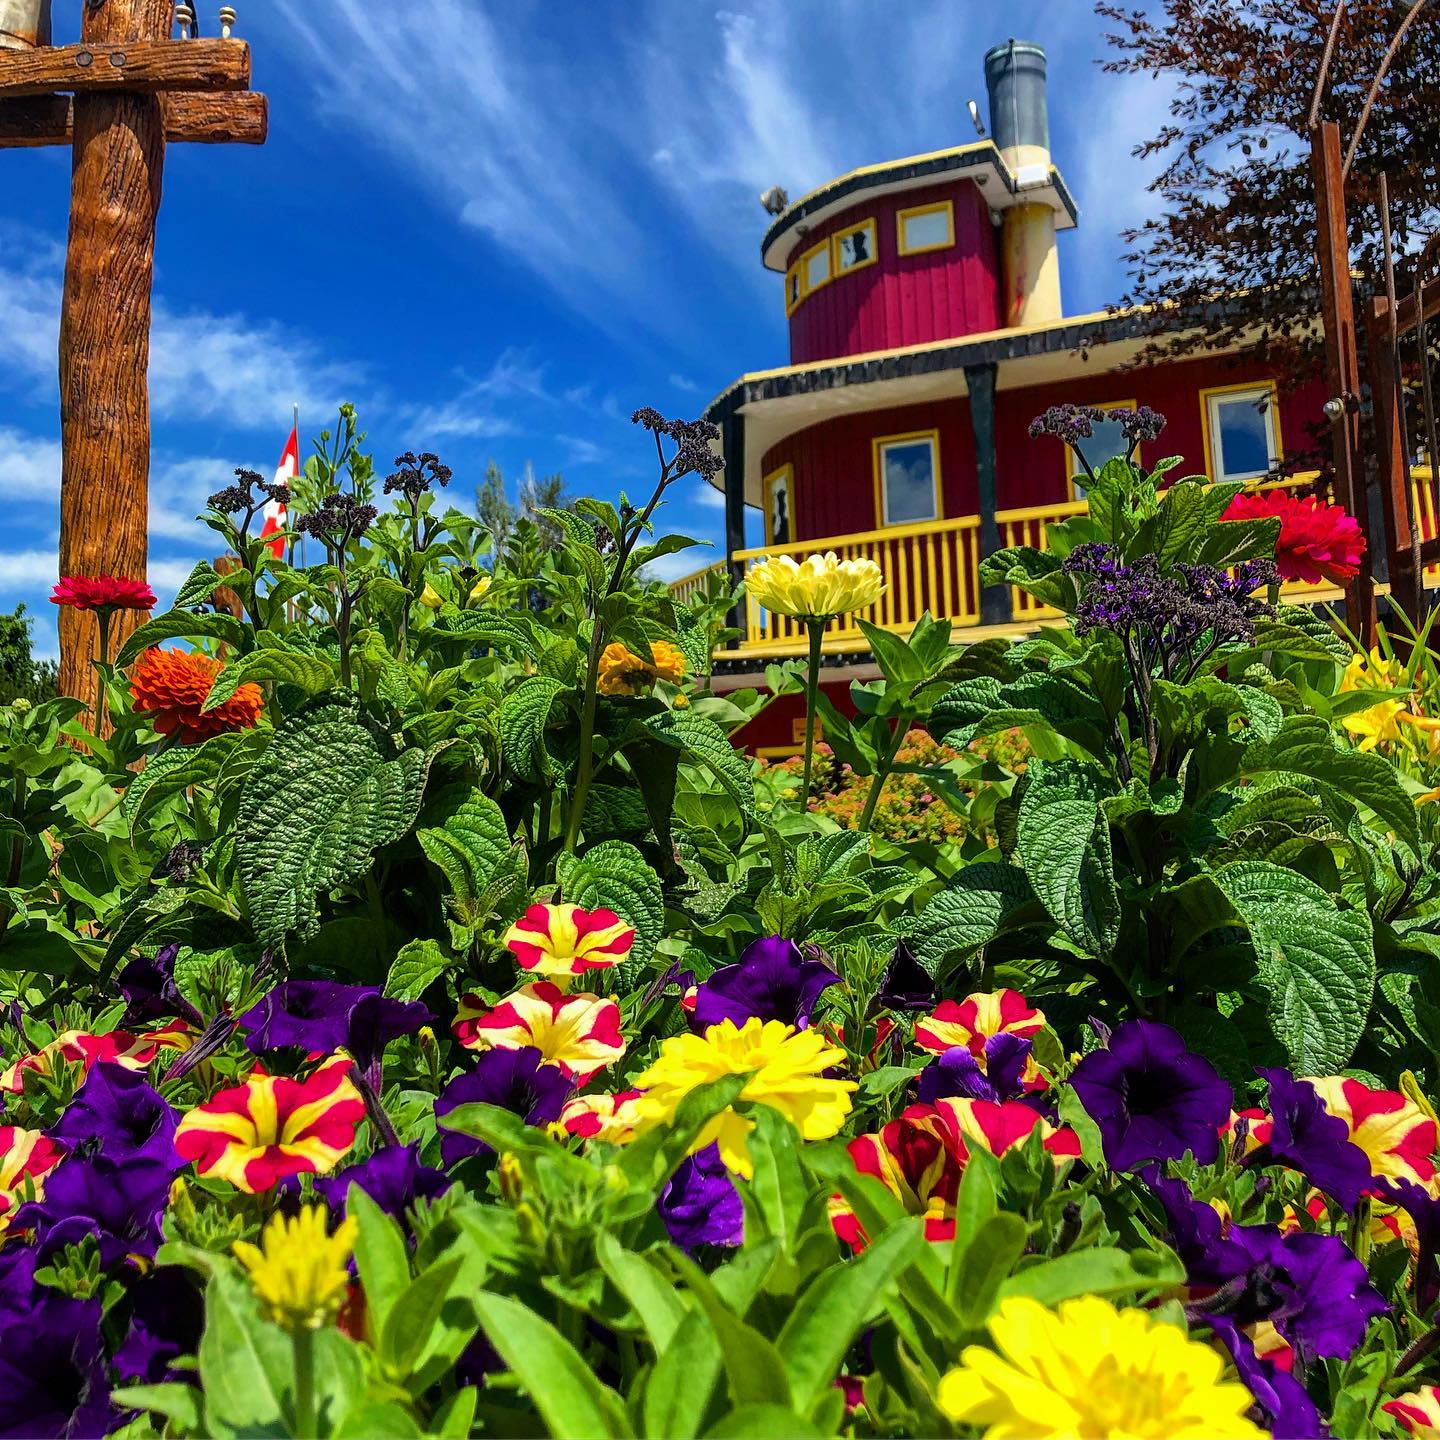 Flowers are in bloom at LocoLanding Adventure Park